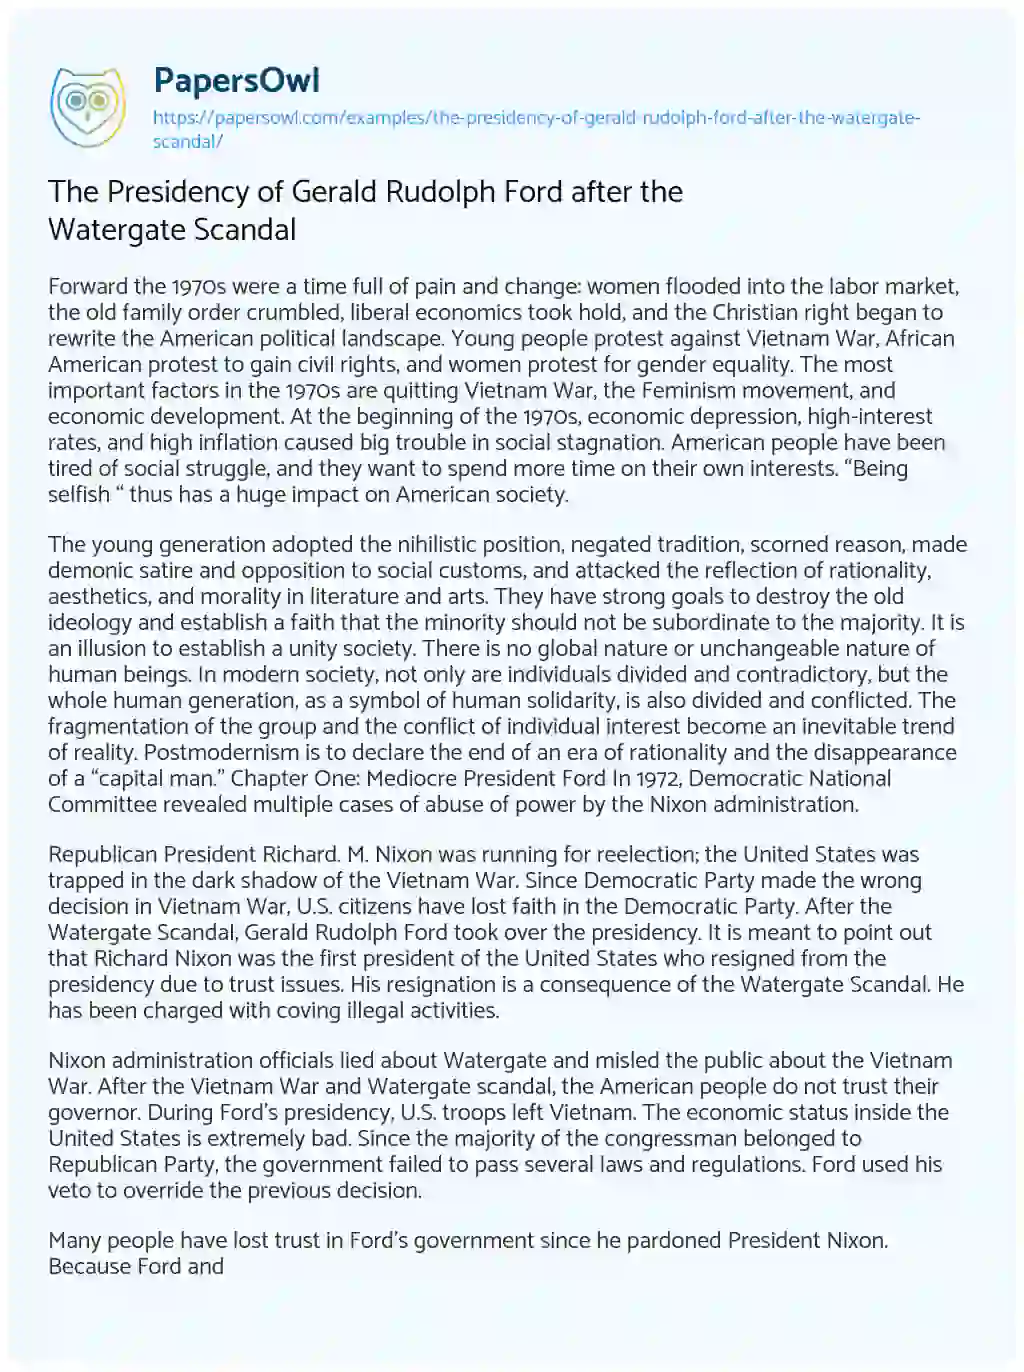 Essay on The Presidency of Gerald Rudolph Ford after the Watergate Scandal